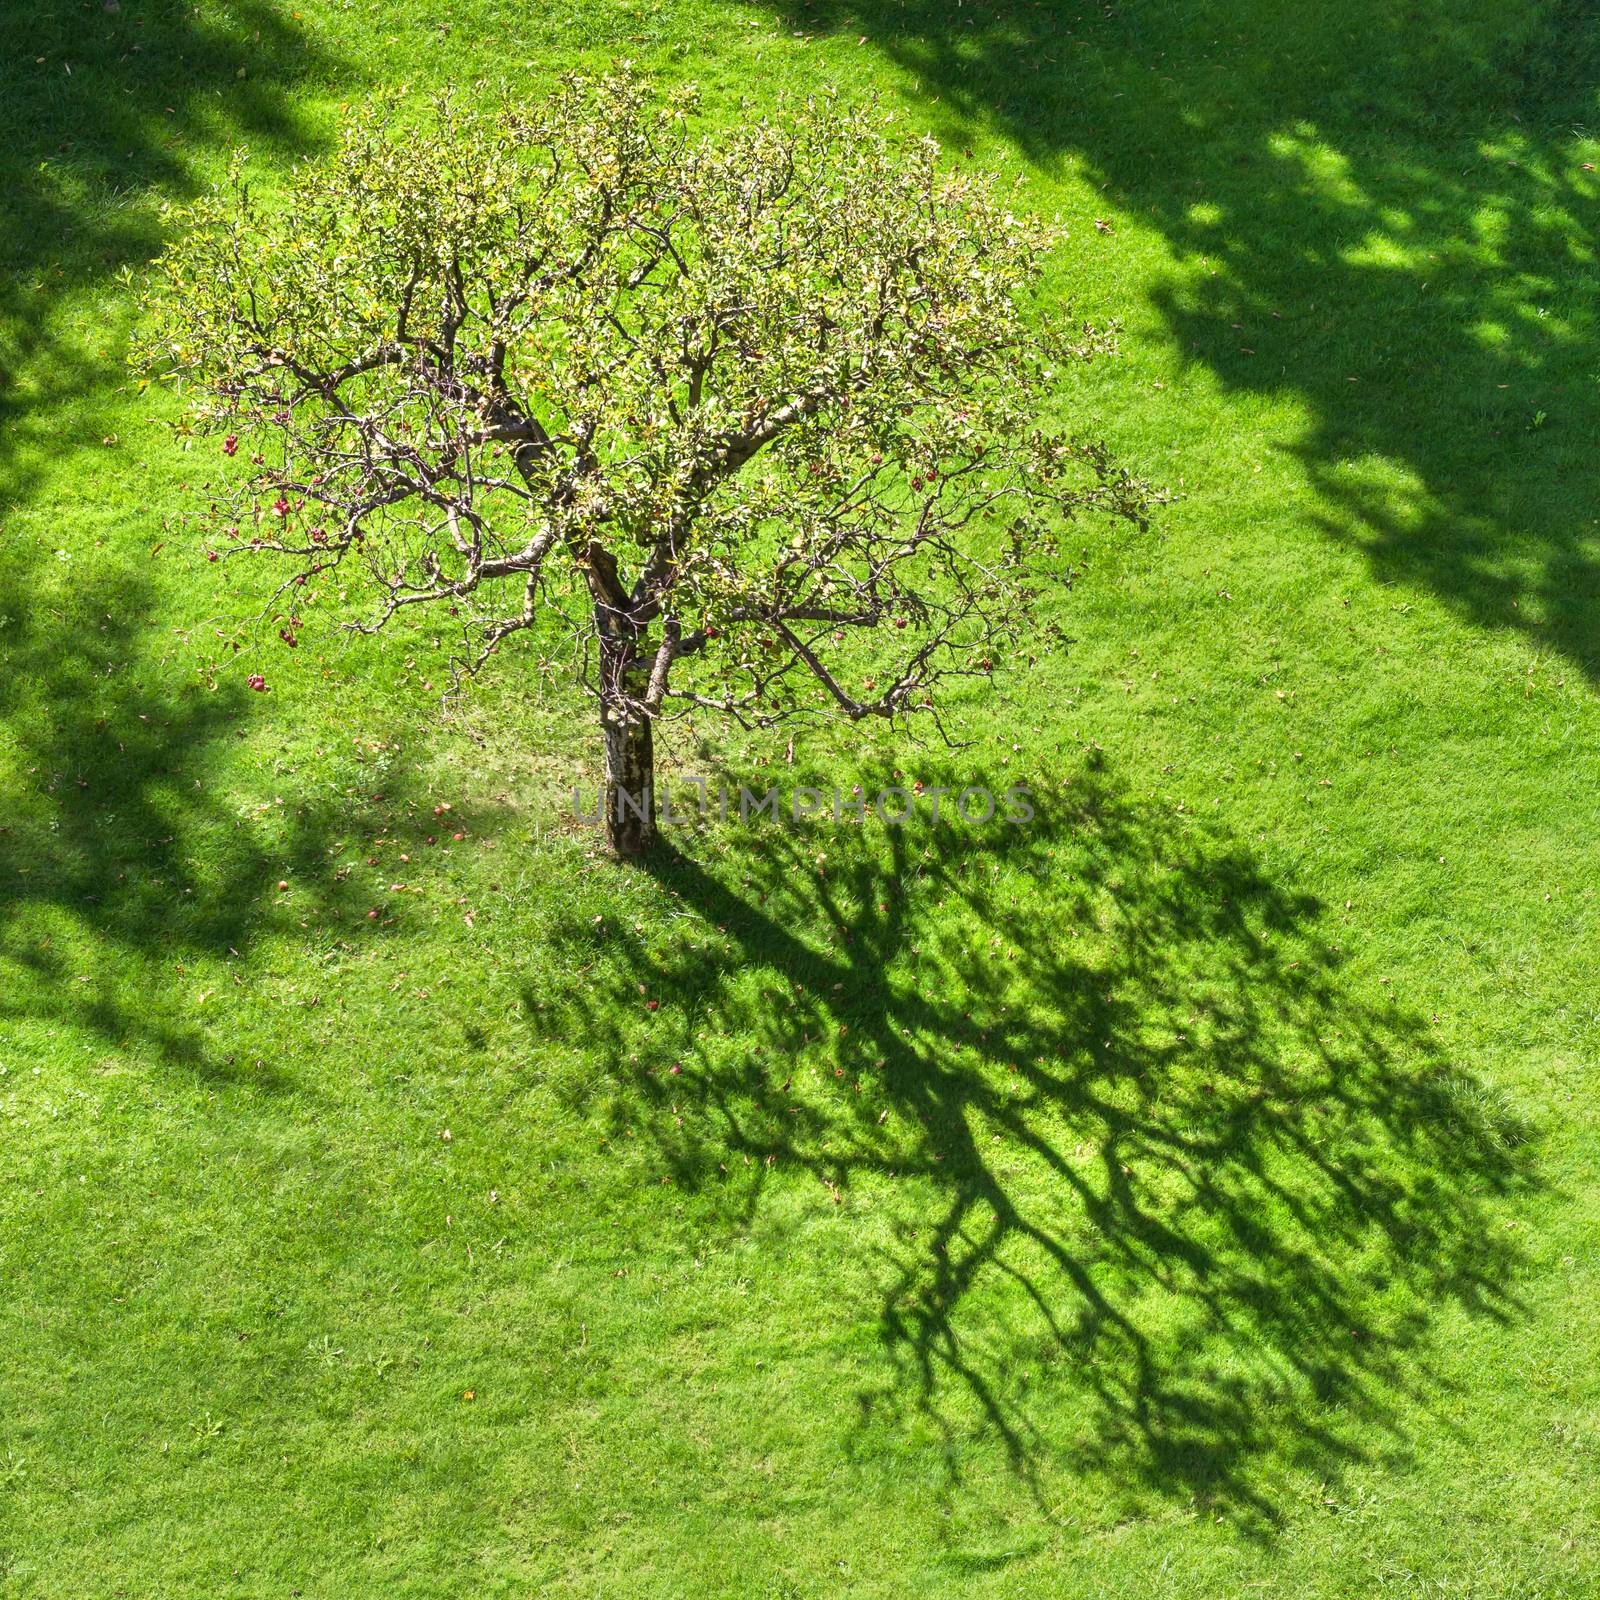 Tree with abstract shadow on green grass. Shade of a tree branches on turf grass in park.